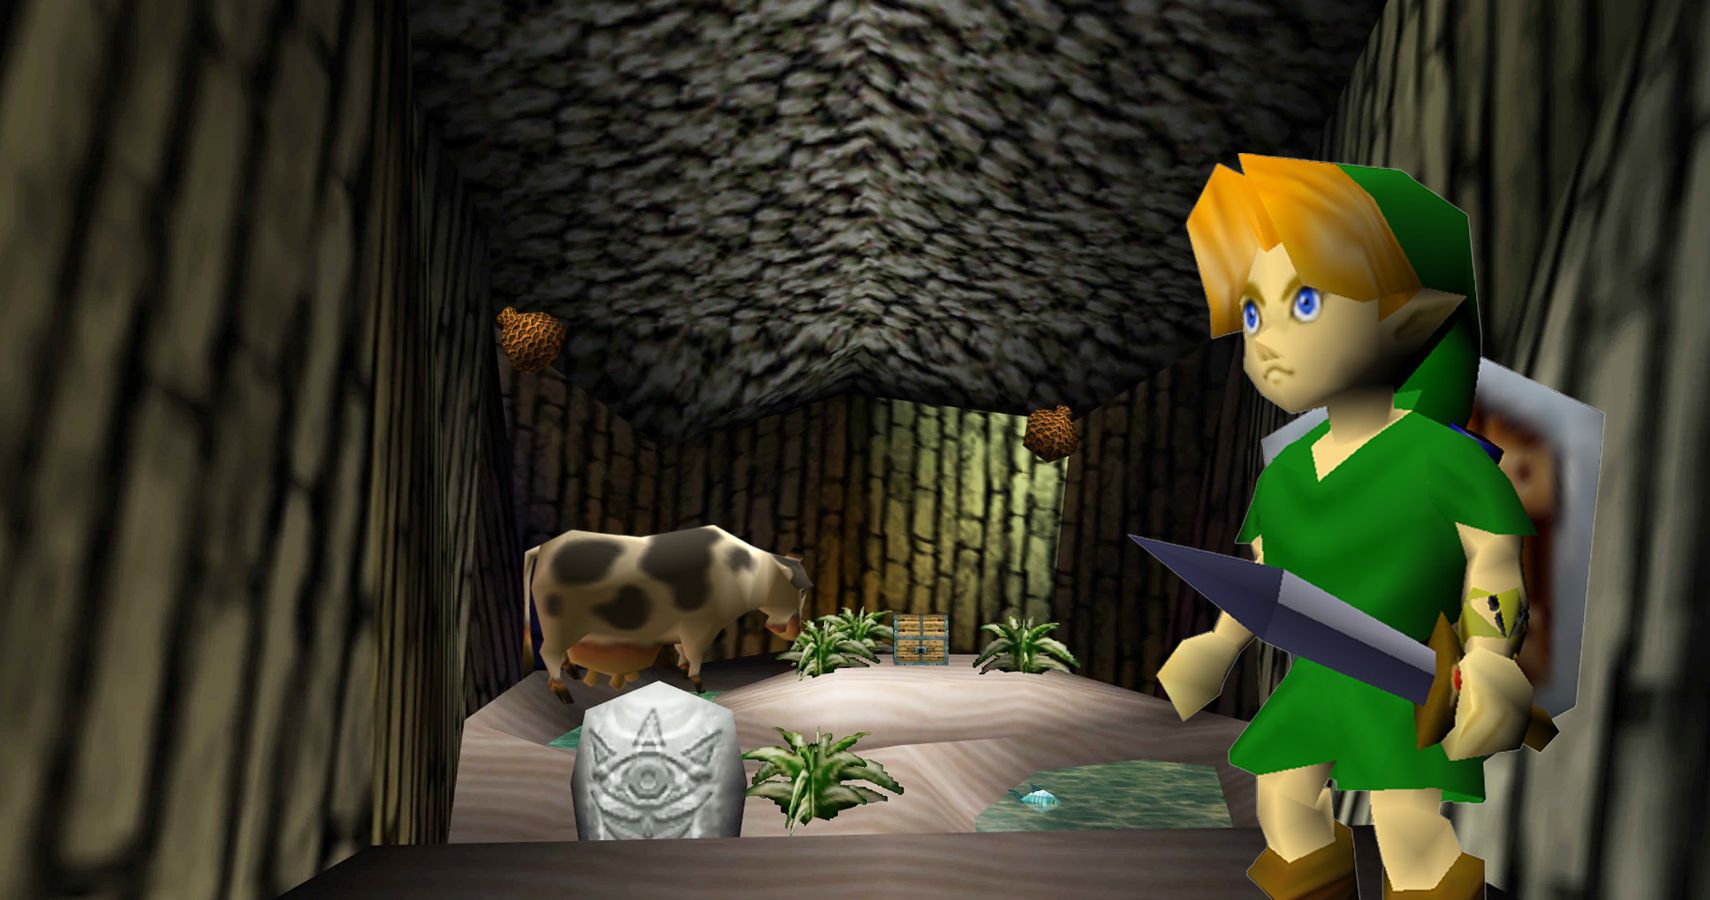 Link in The Lost Woods - The Legend of Zelda: Ocarina of Time